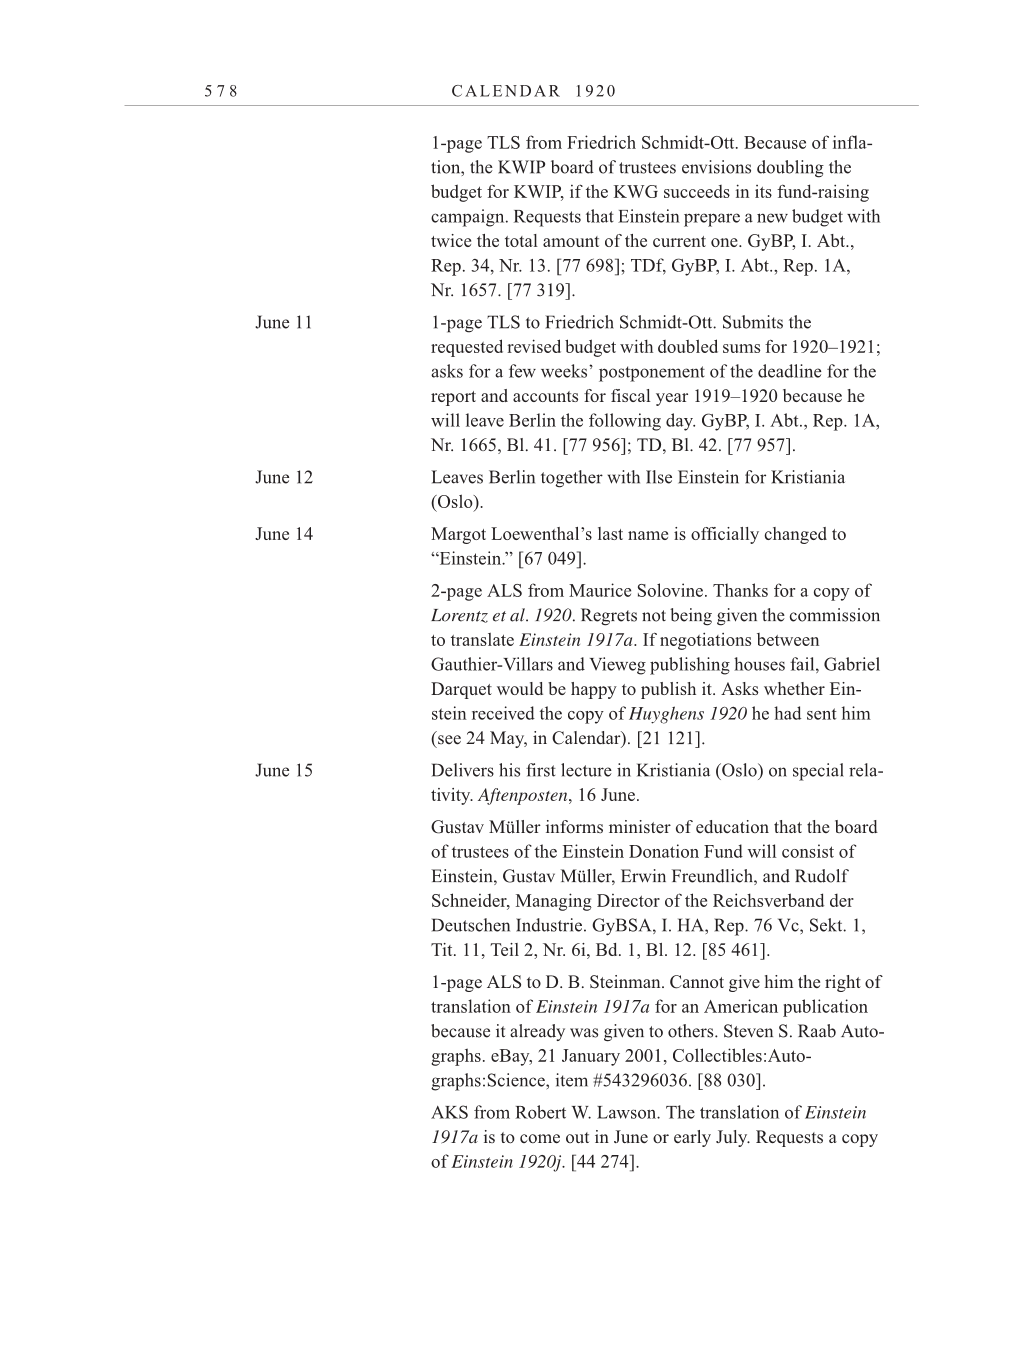 Volume 10: The Berlin Years: Correspondence May-December 1920 / Supplementary Correspondence 1909-1920 page 578